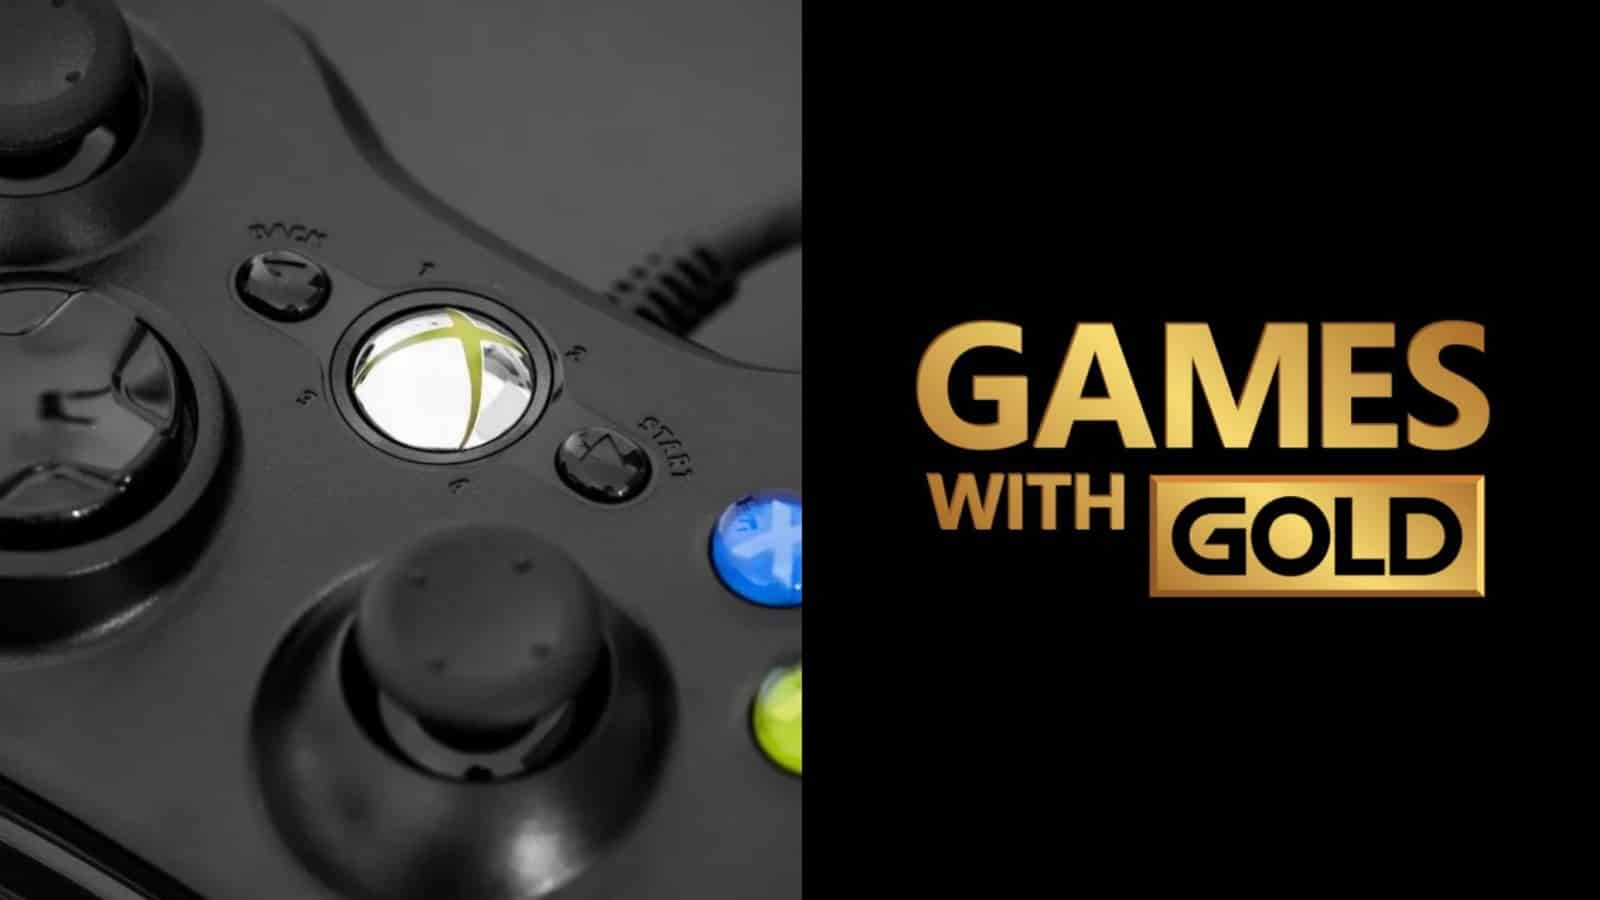 games with gold leaving 360 behind